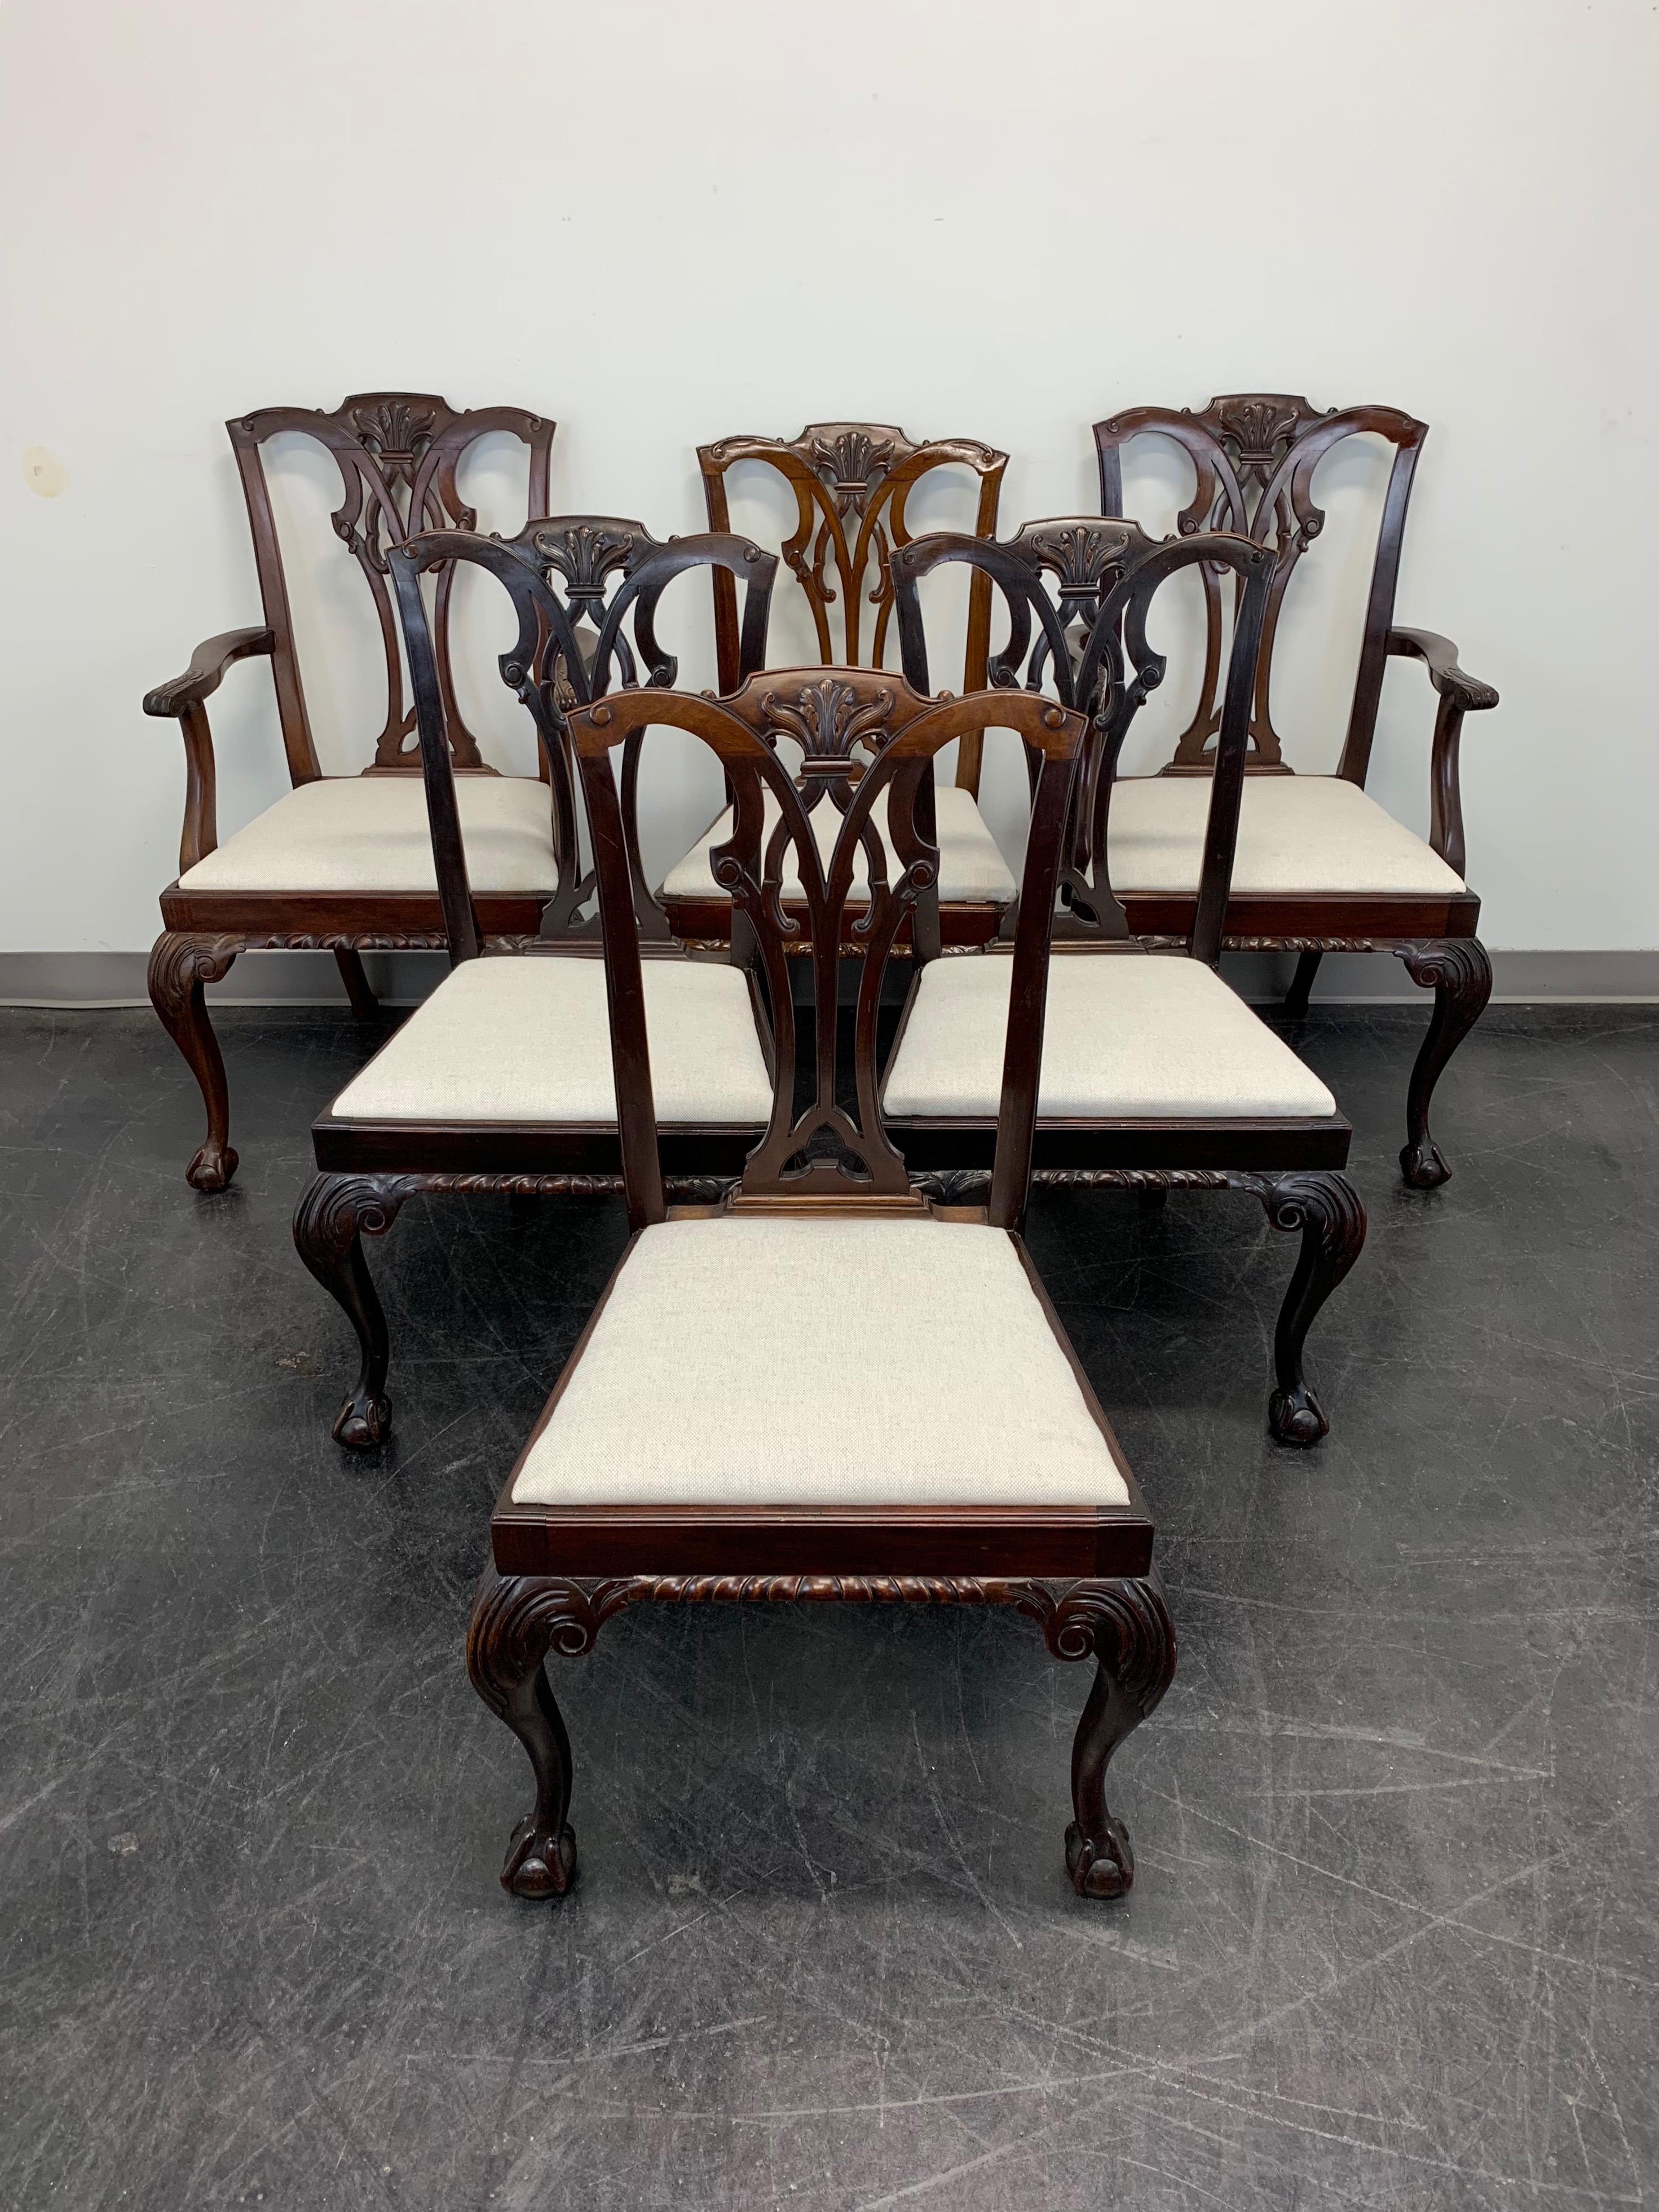 An antique set of six English Chippendale style dining chairs made for Pratt Brothers, of Streatham, London, United Kingdom. Solid mahogany, carved crestrail & backrest, curved arms with paw ends to armchair, carved apron, neutral cream color fabric